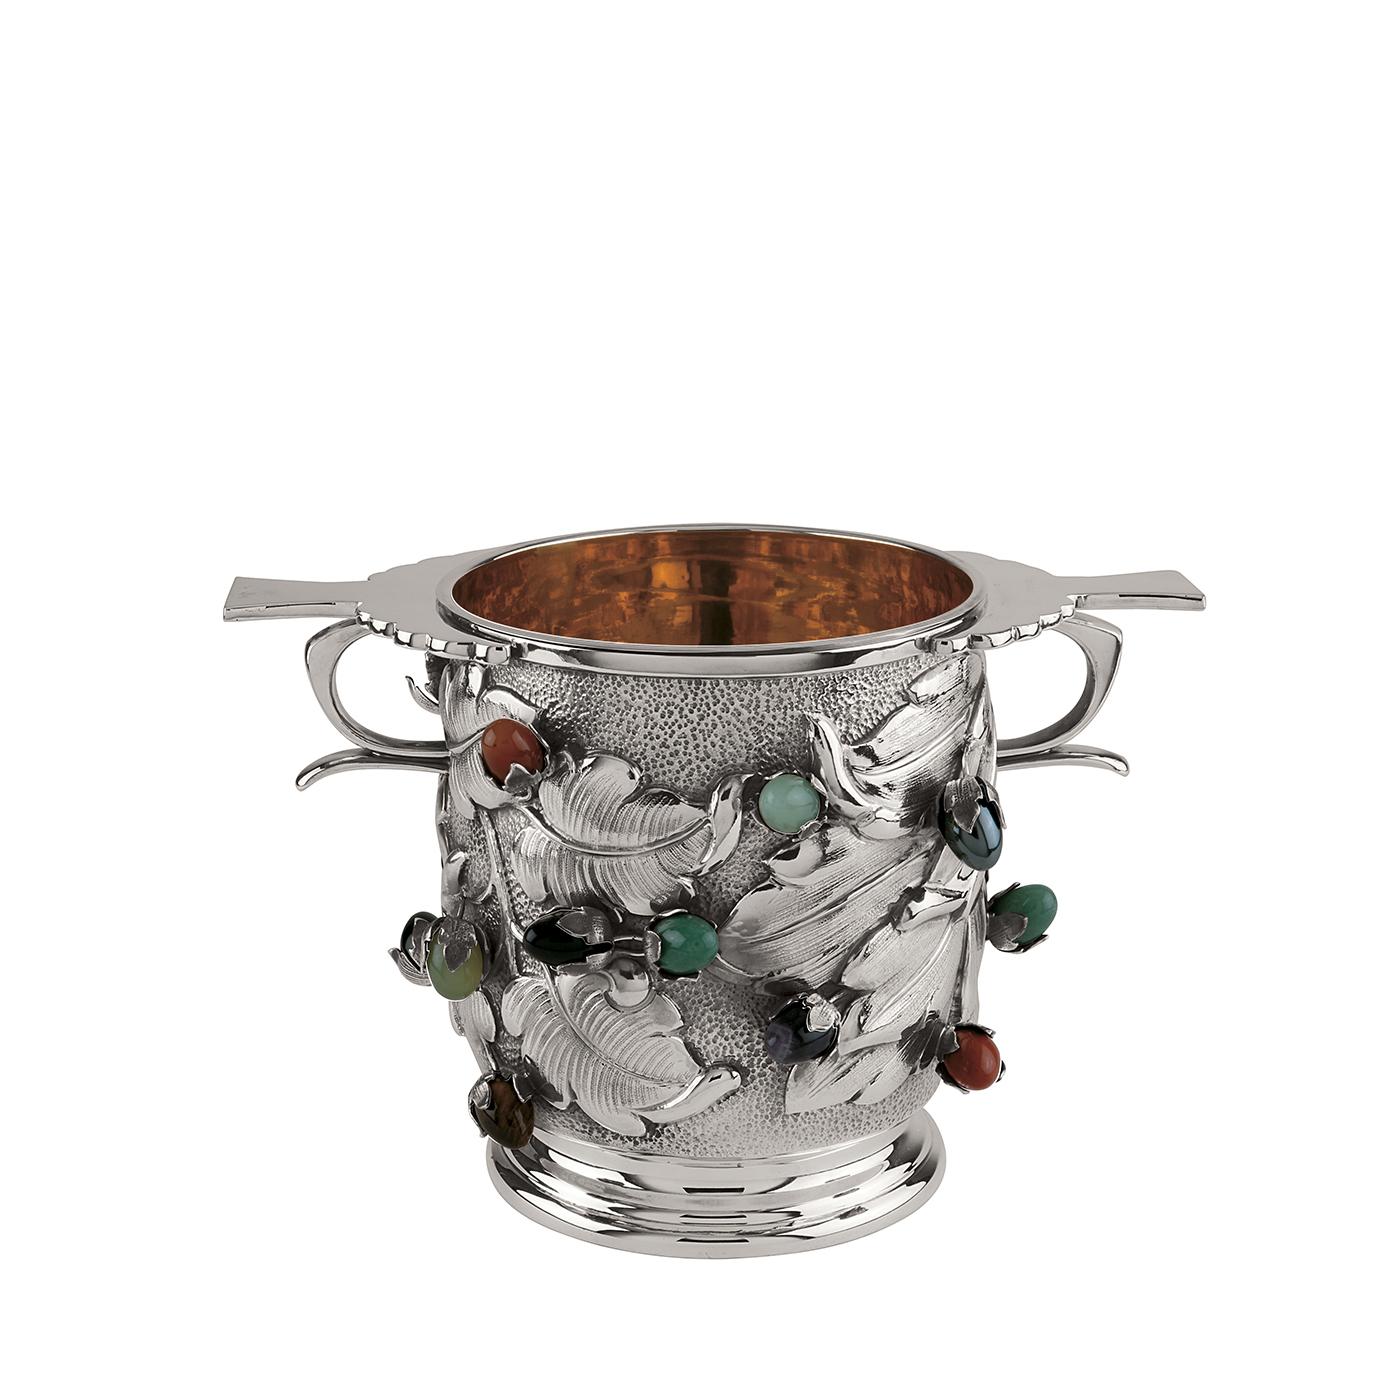 This majestic silver champagne bucket combines artisanal craftsmanship and artistic flair and will add a sophisticated touch to a celebratory event. The bucket carries a removable bowl internally finished in gold, while the exterior features two